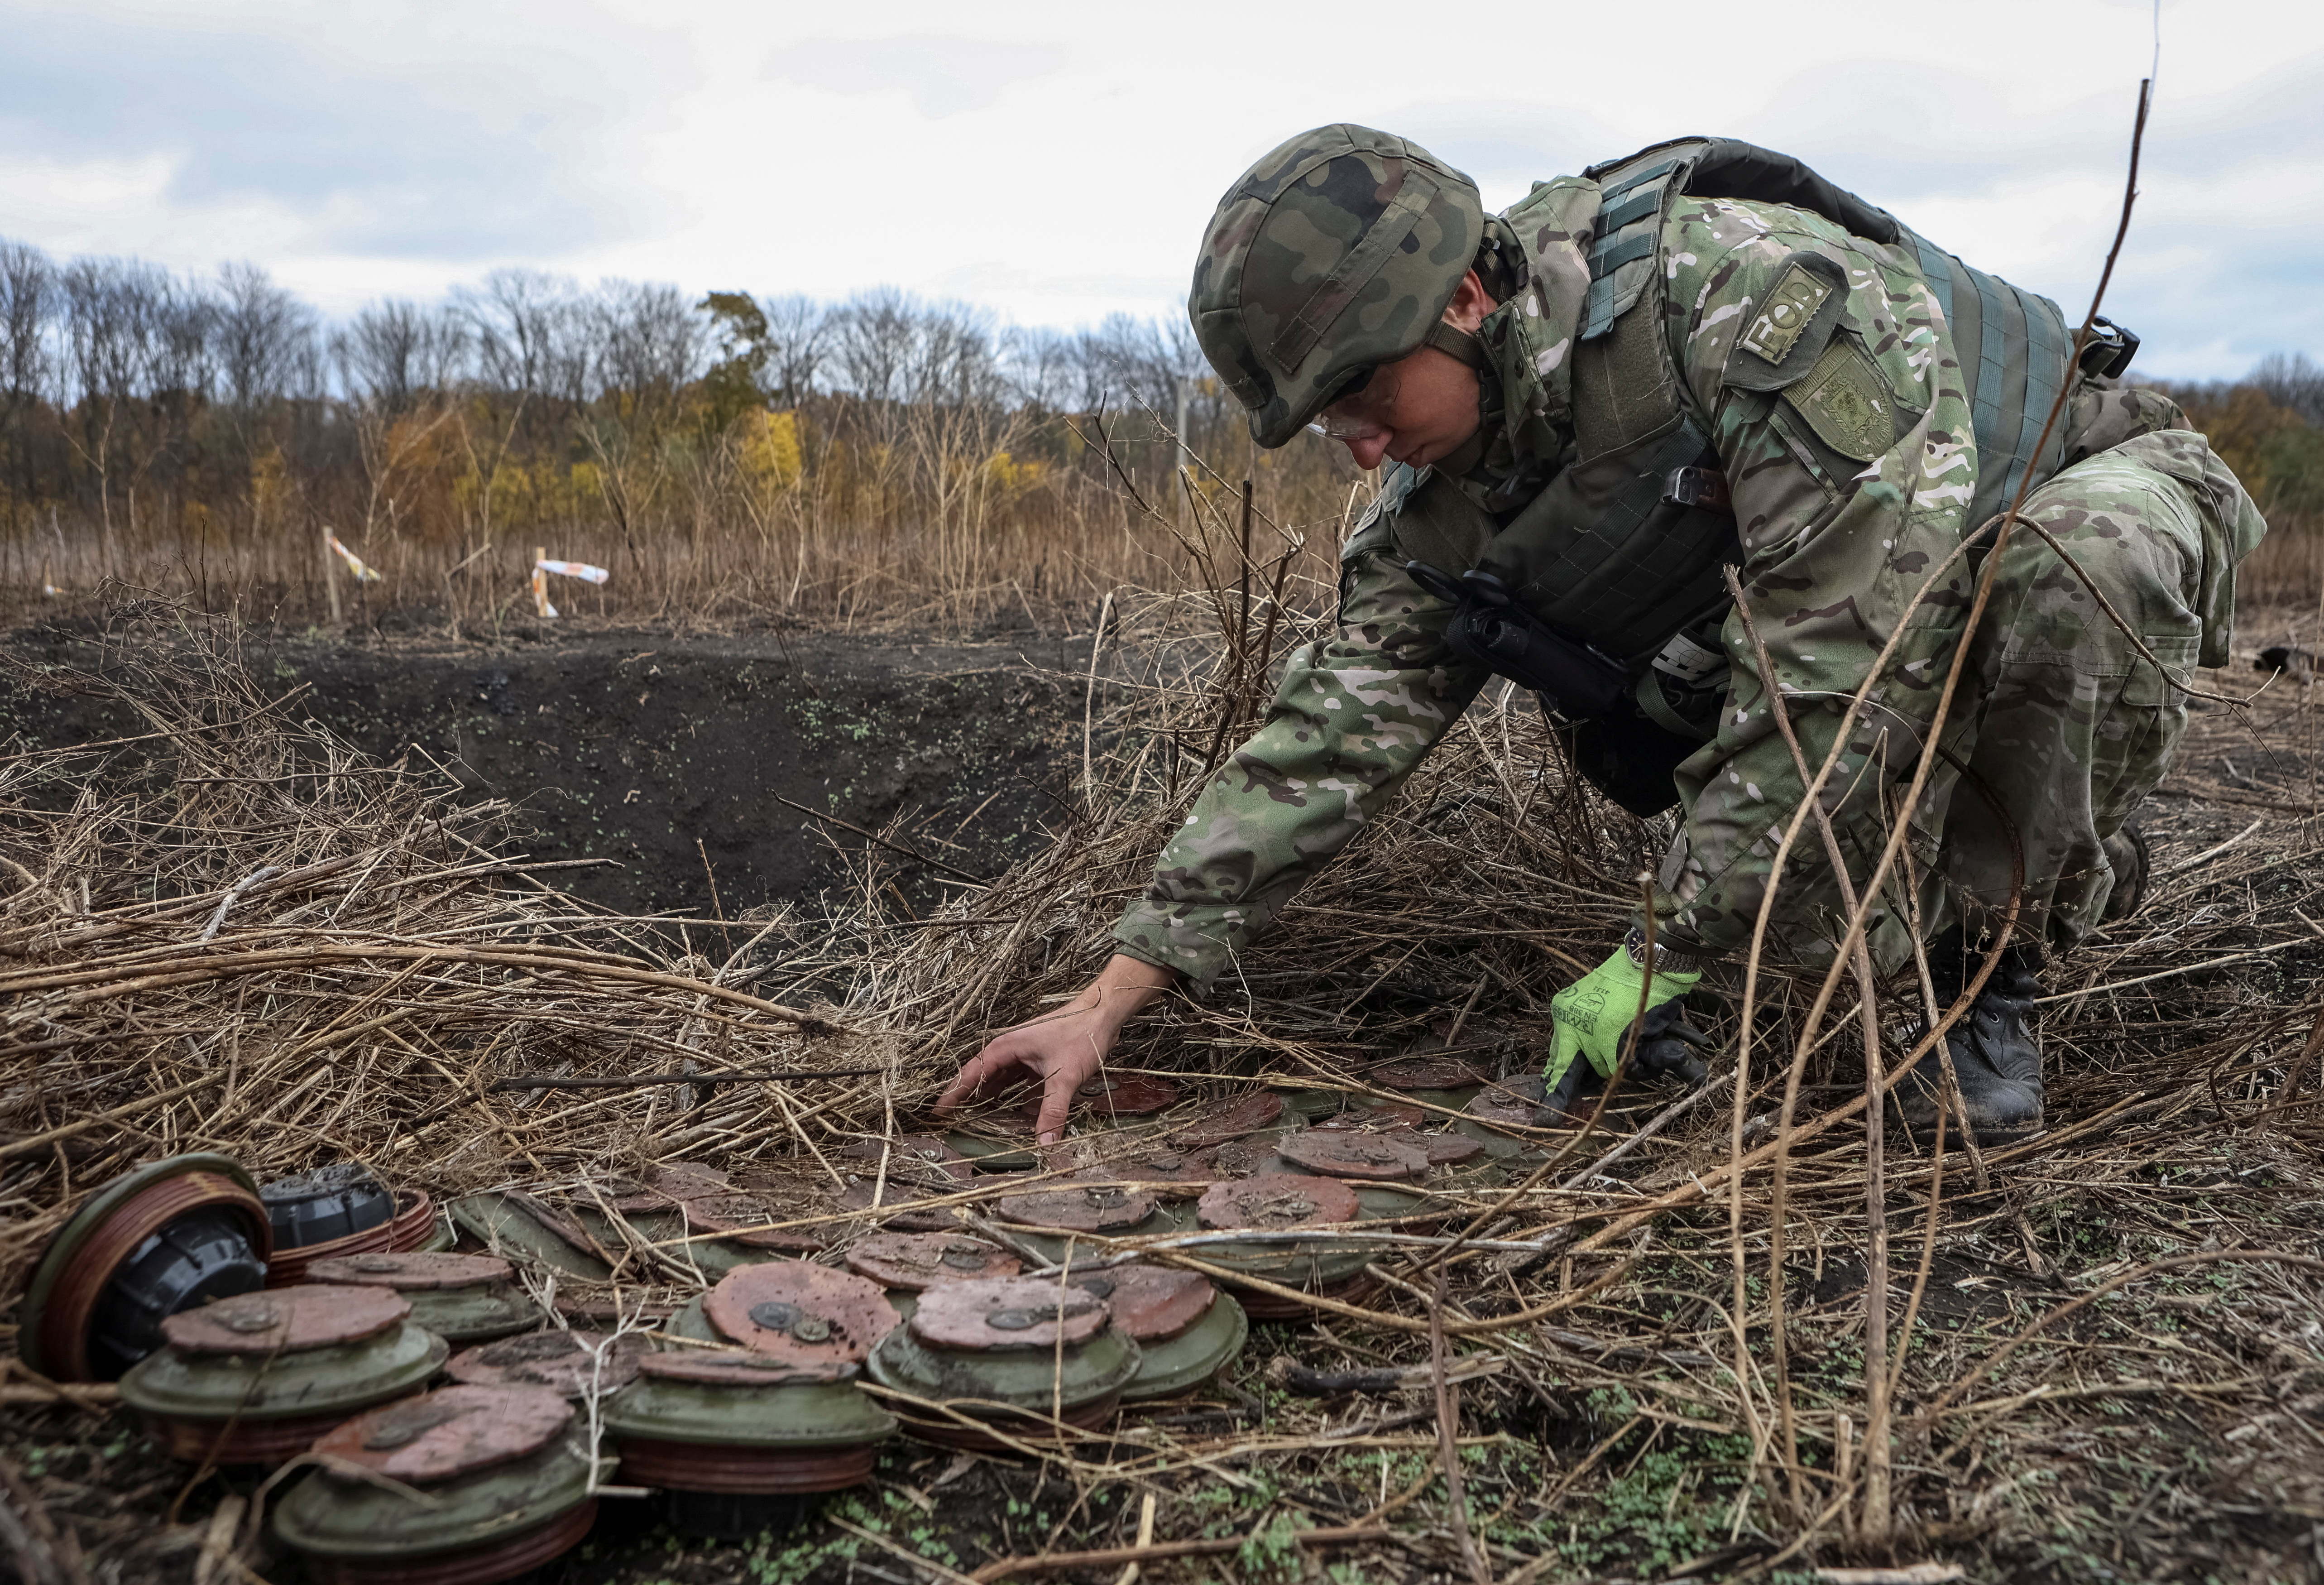 A member of the National police special demining unit works with mine fuses during a demining operation near Izum